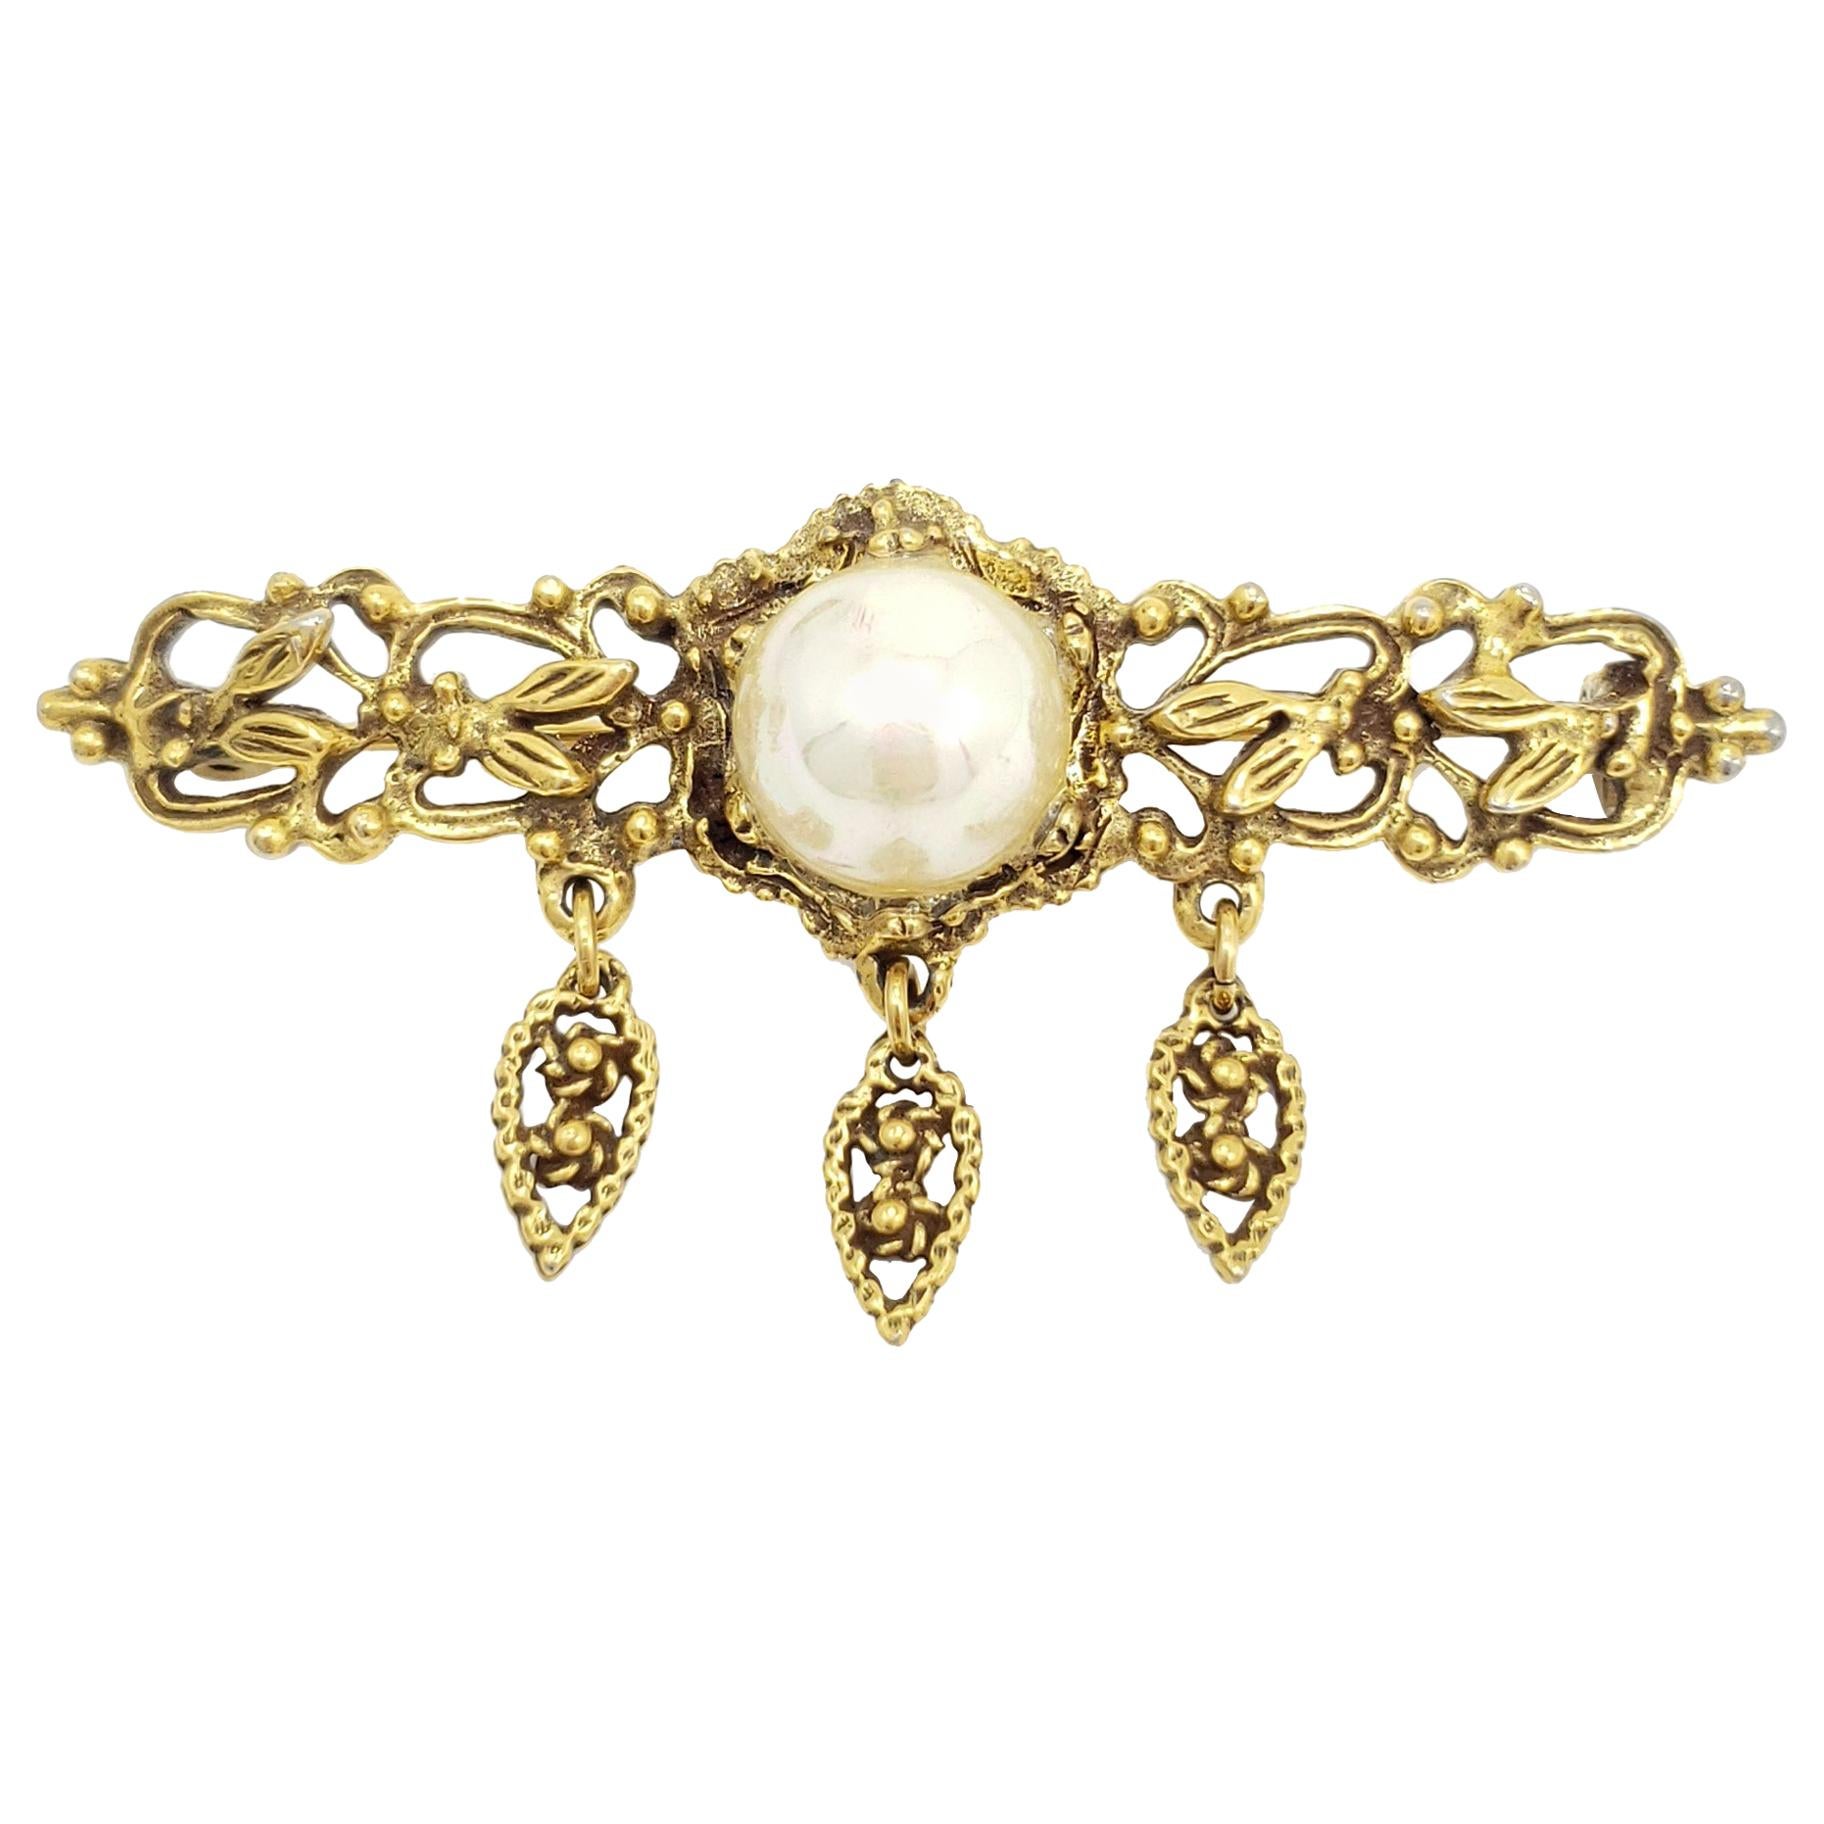 Gold Faux Pearl Floral Pin Brooch, Victorian Style, Circa 1950s